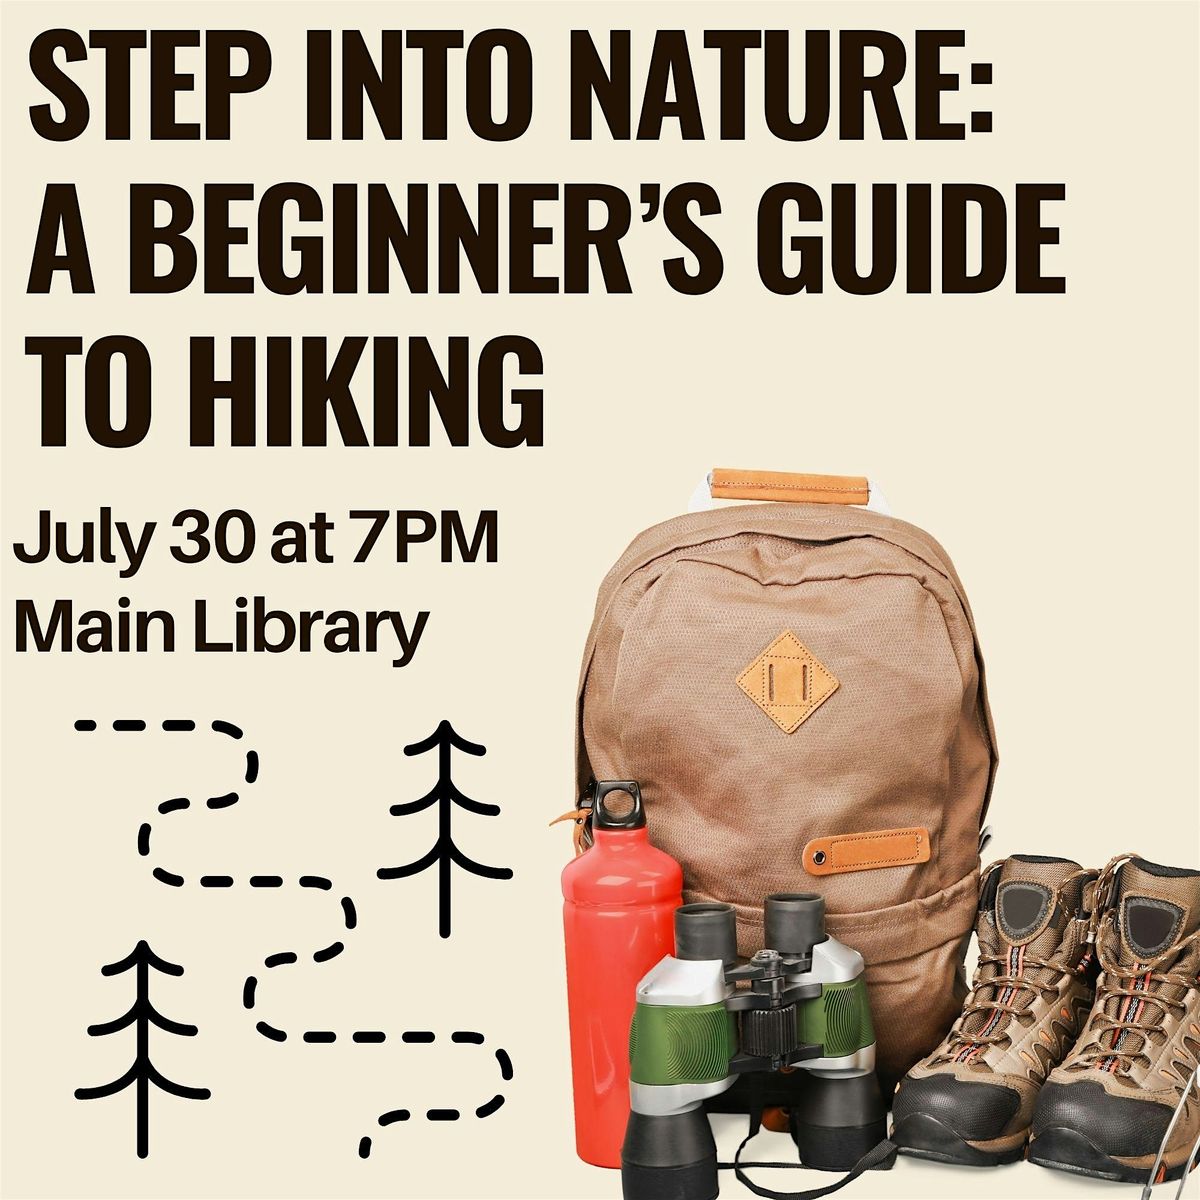 Step Into Nature: A Beginner's Guide to Hiking